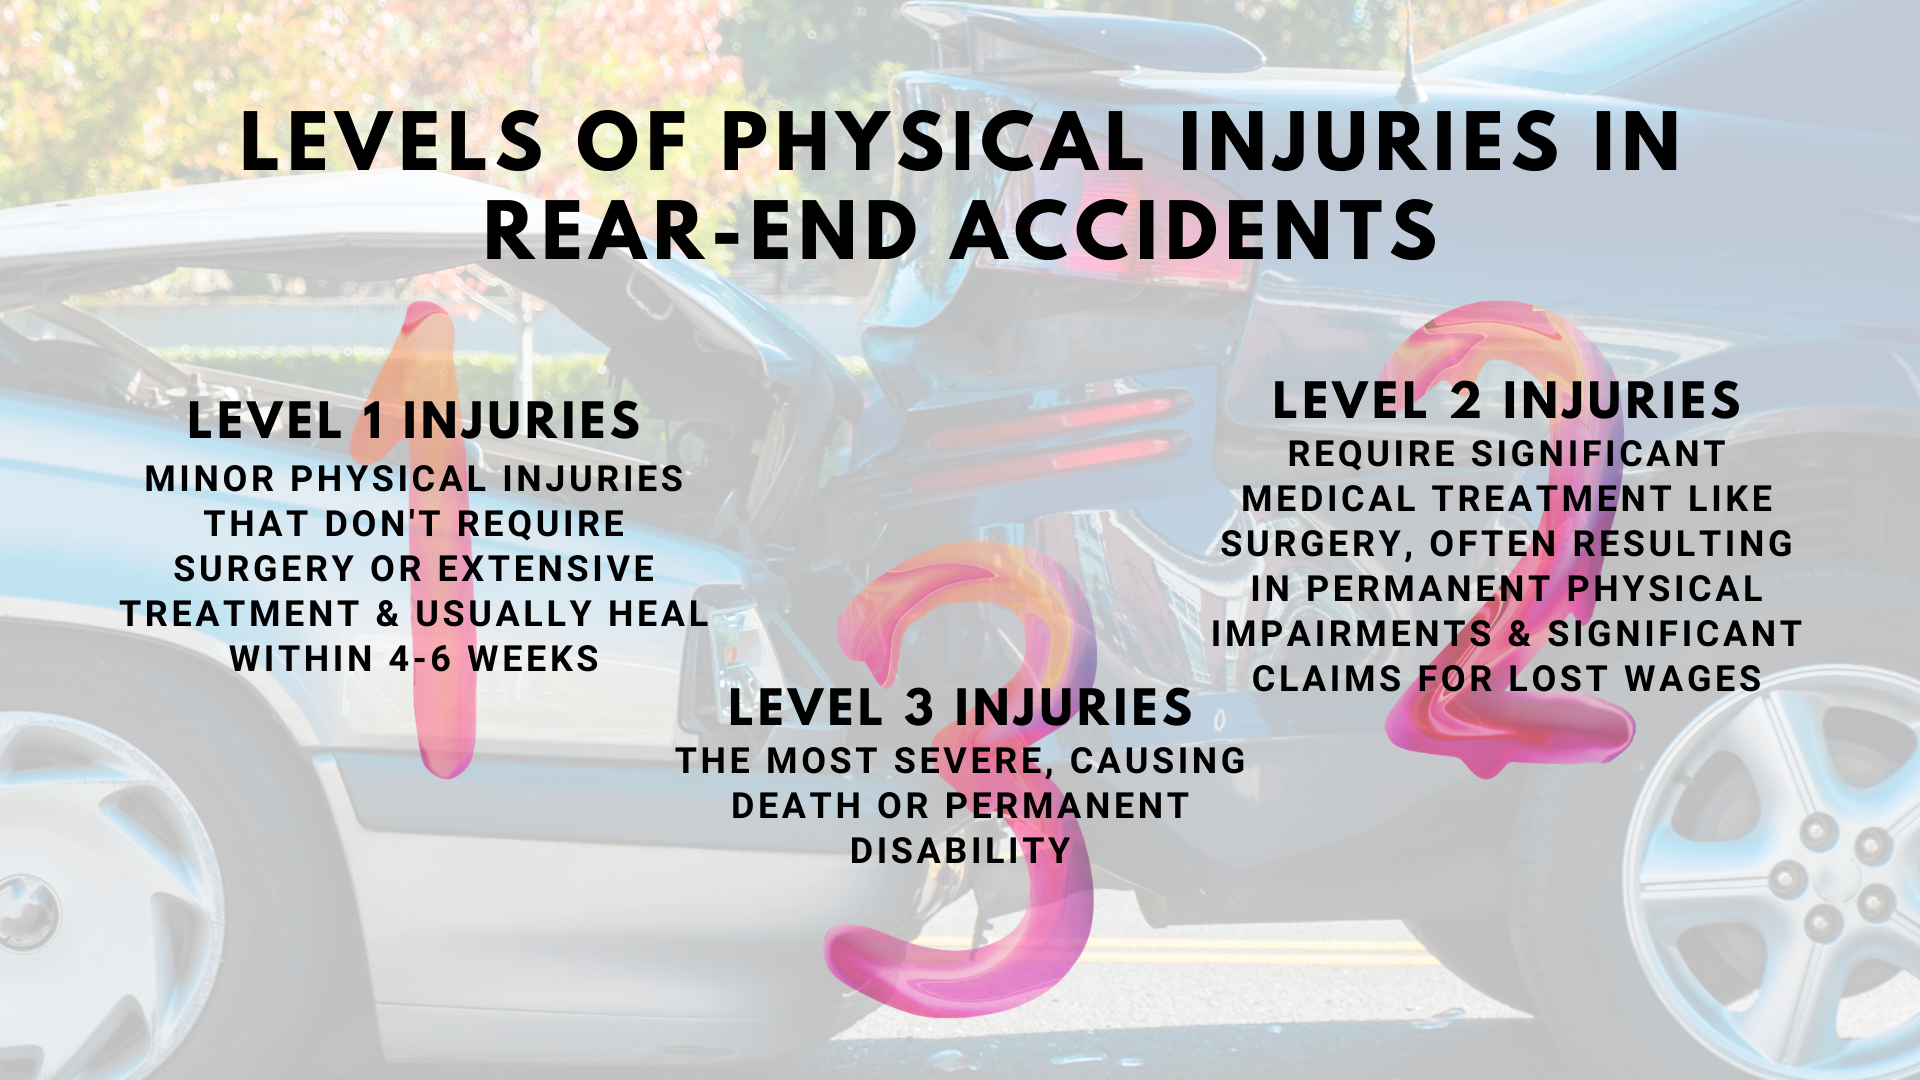 What Is the Average Payout for a Rear-End Collision?